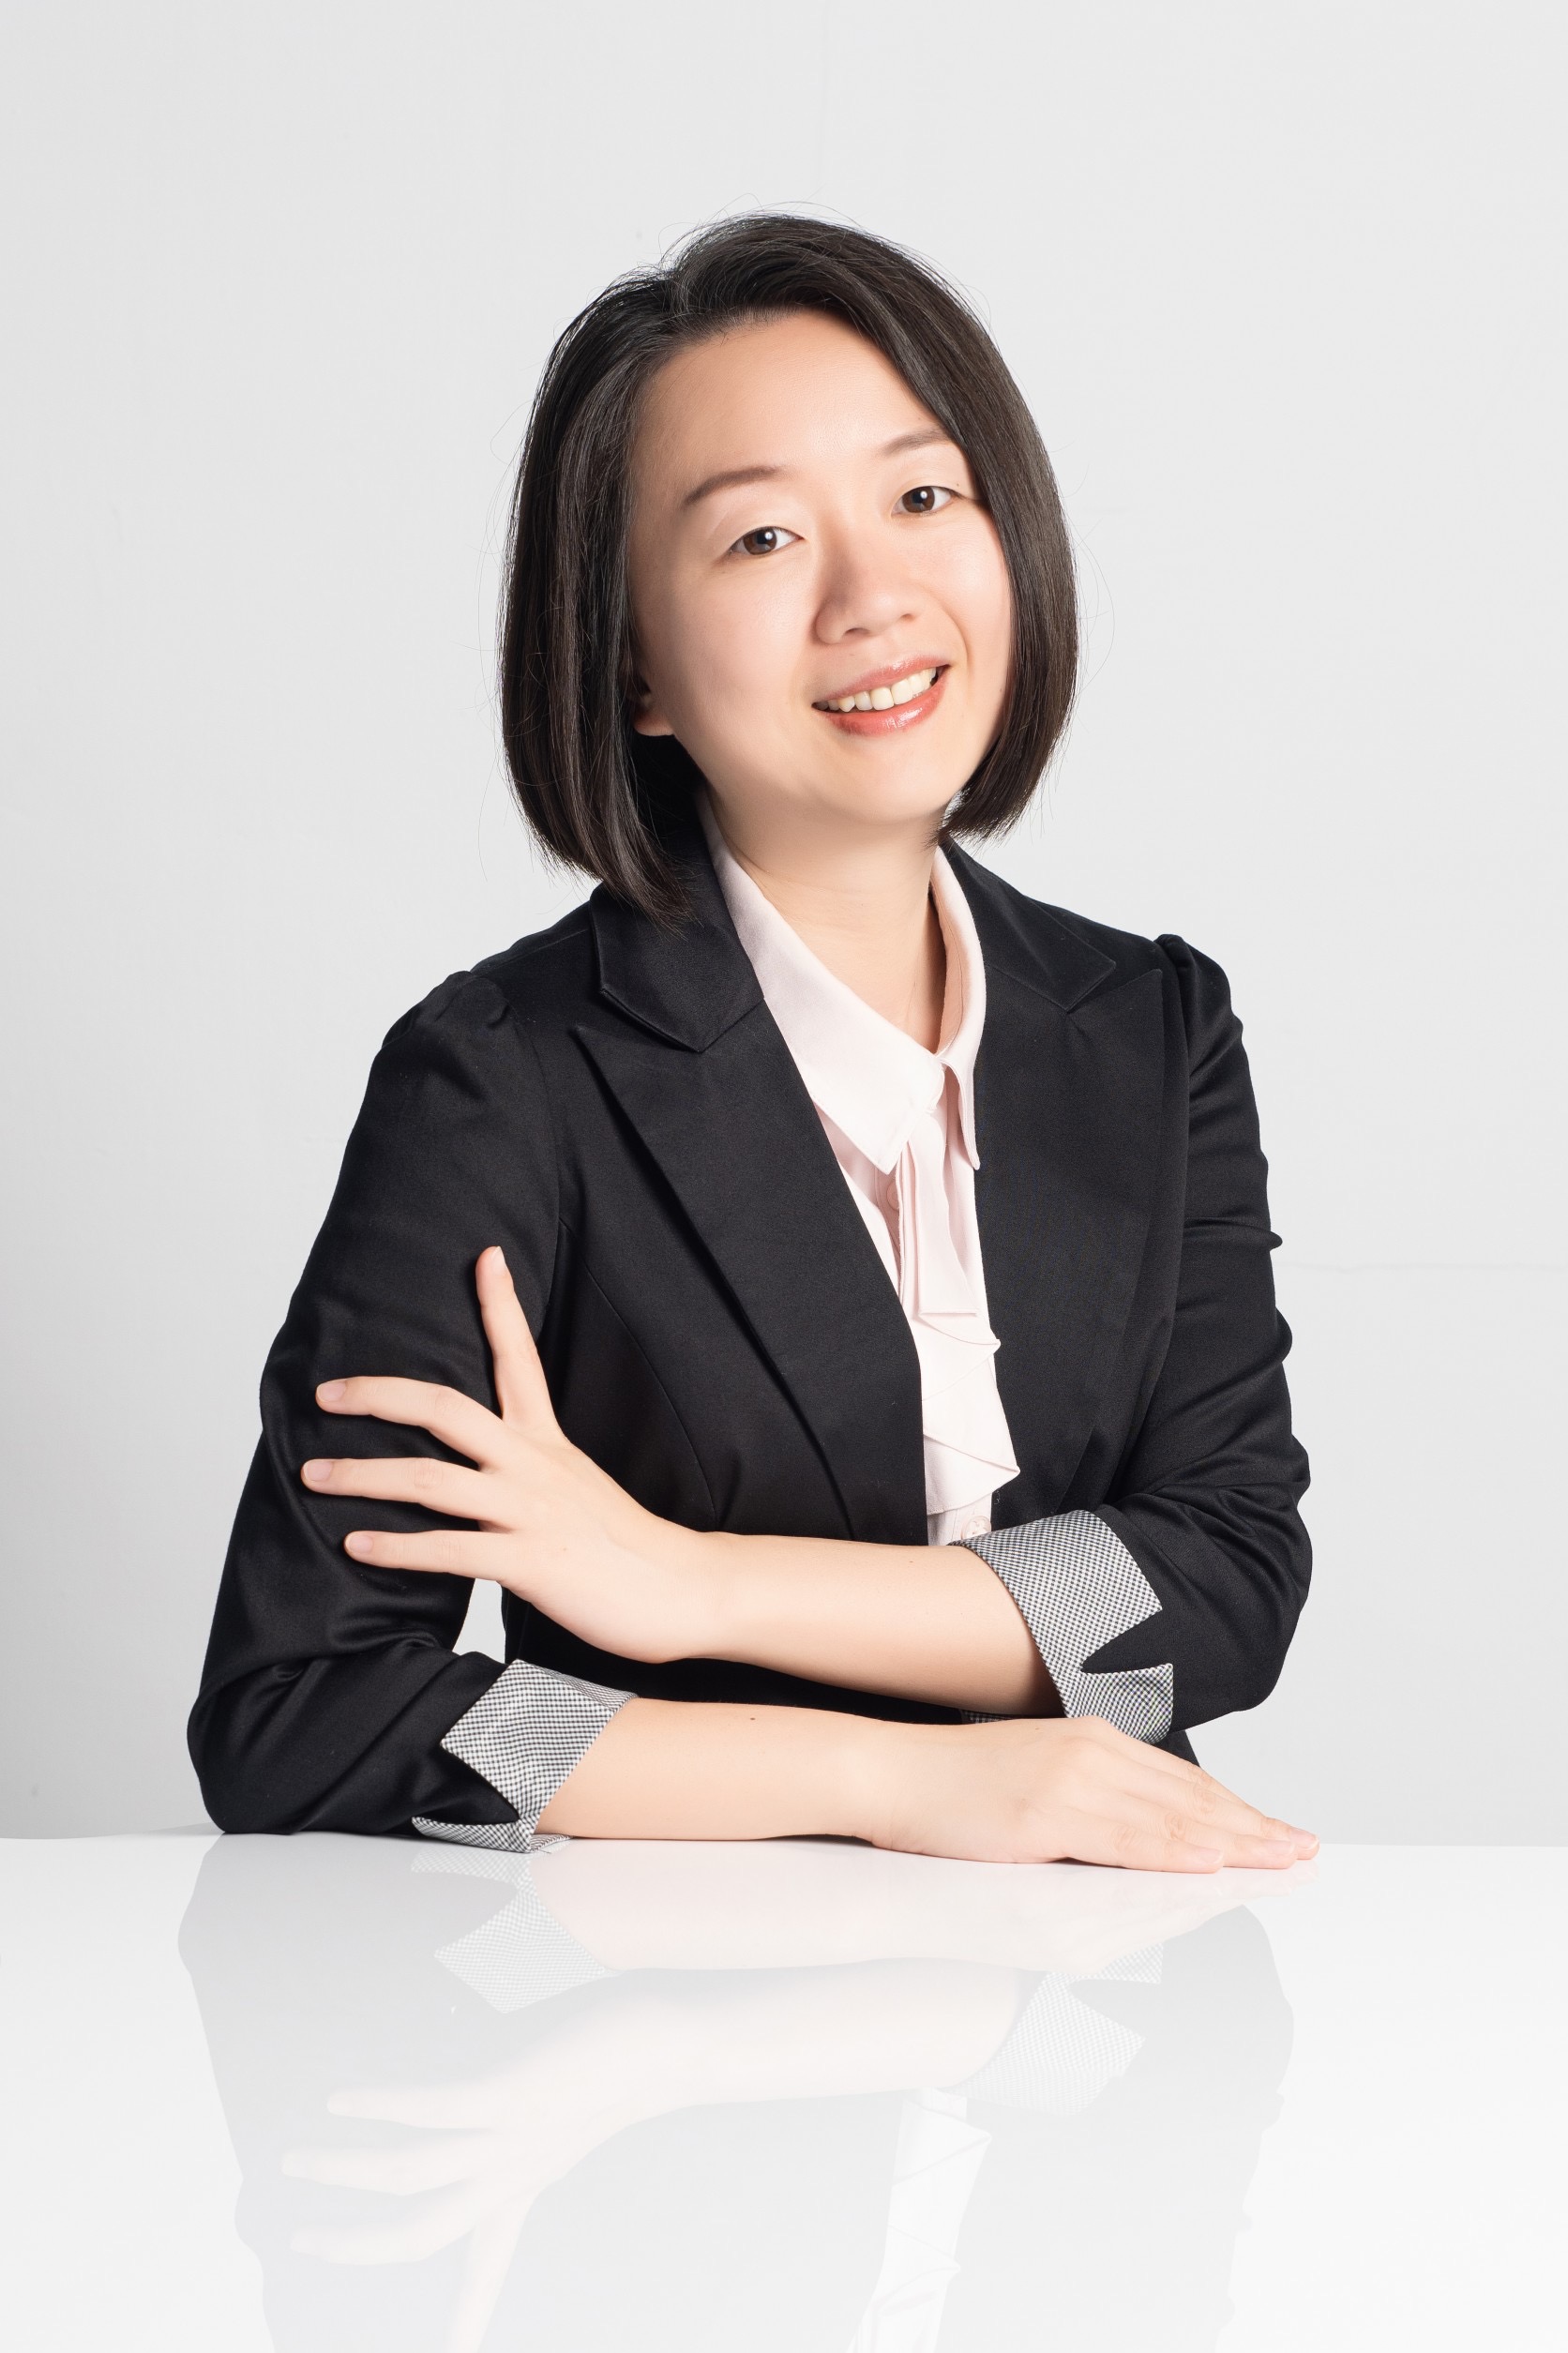 Ms. Ying Chi Hsu, Research and Development Manager